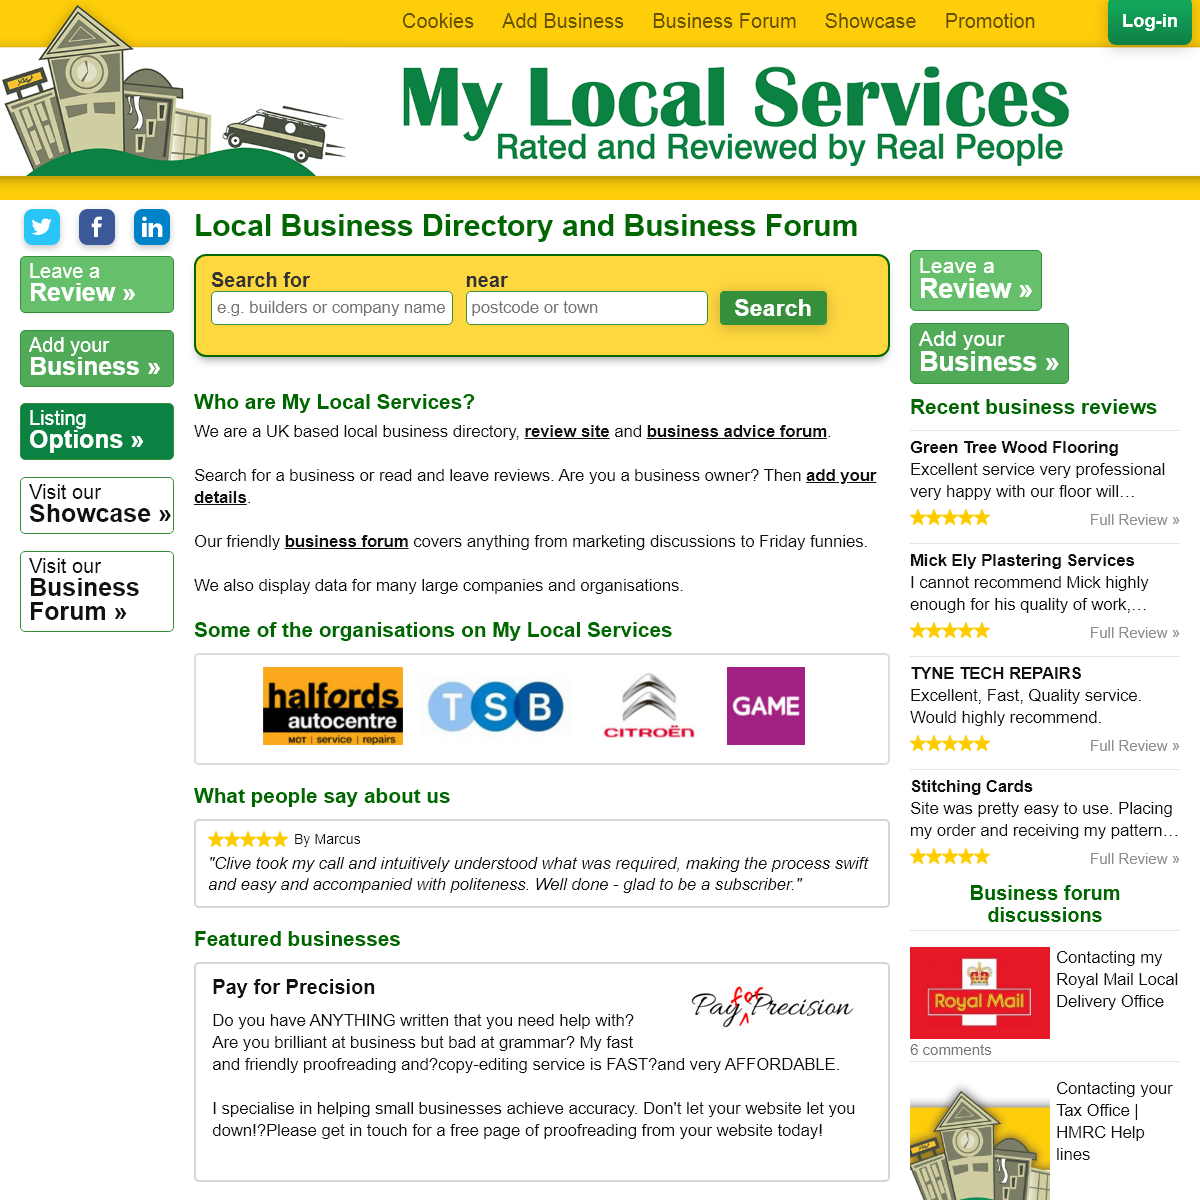 A complete backup of mylocalservices.co.uk